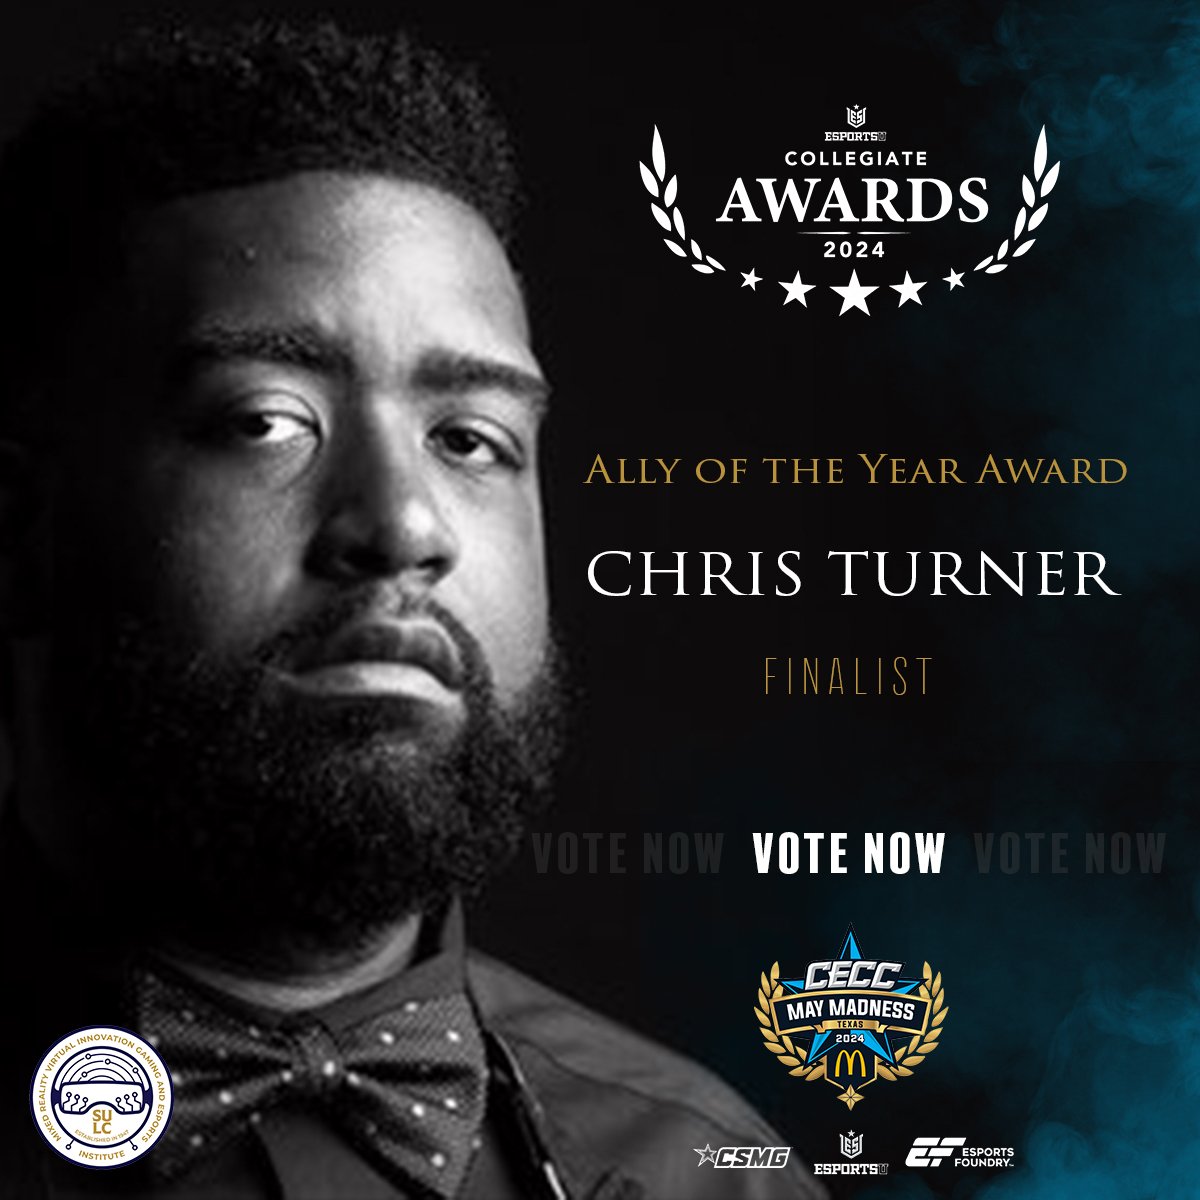 LAST WEEK TO VOTE!!! This category is awarded to an individual who has displayed considerable signs of leadership, advocacy, and development as it pertains to helping make the scholastic esports space more inclusive, diverse, and welcoming. Cast your vote for Chris Turner